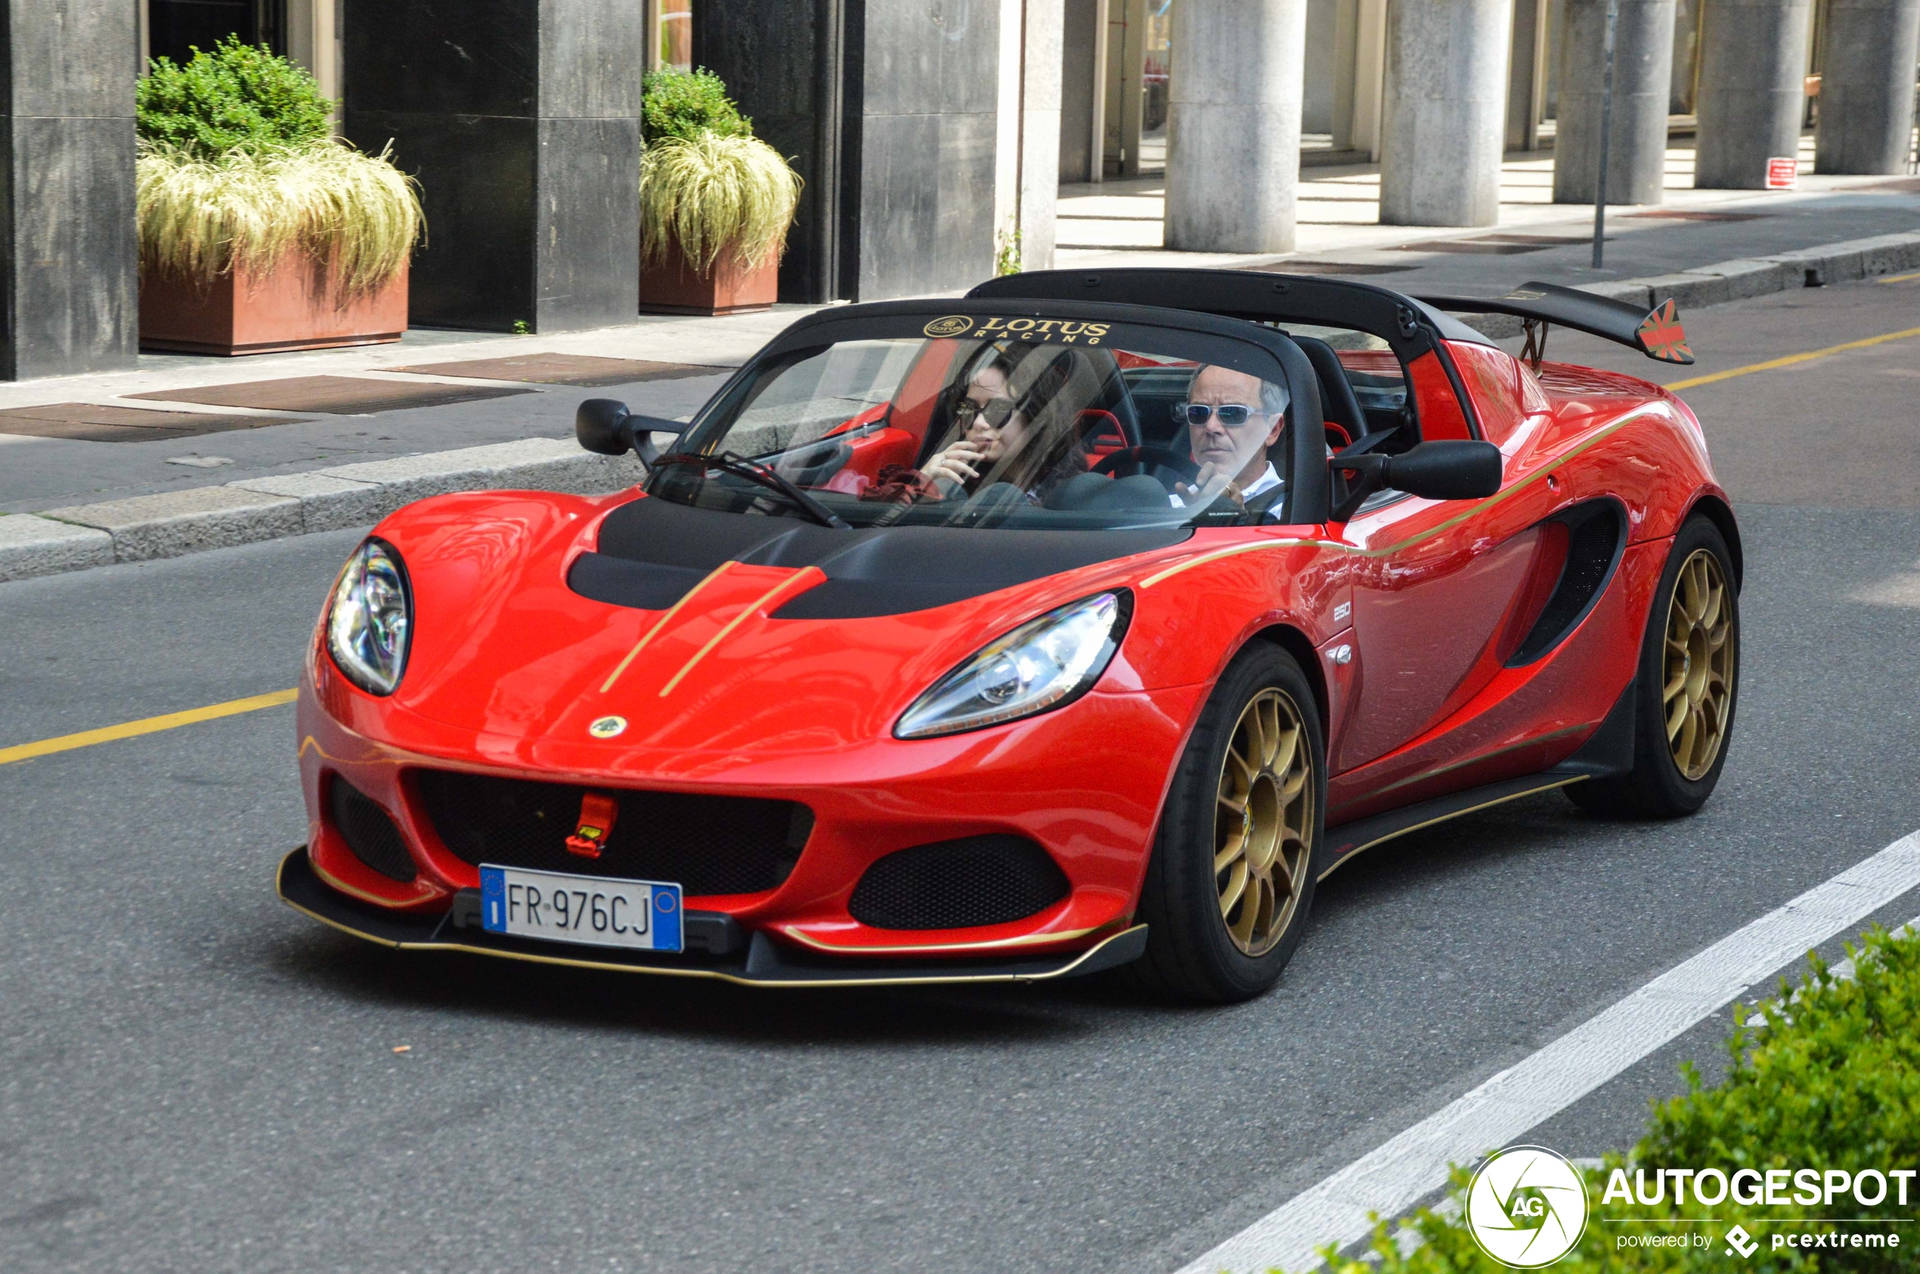 Catalogue Picture Of Red Lotus Elise Car Wallpaper